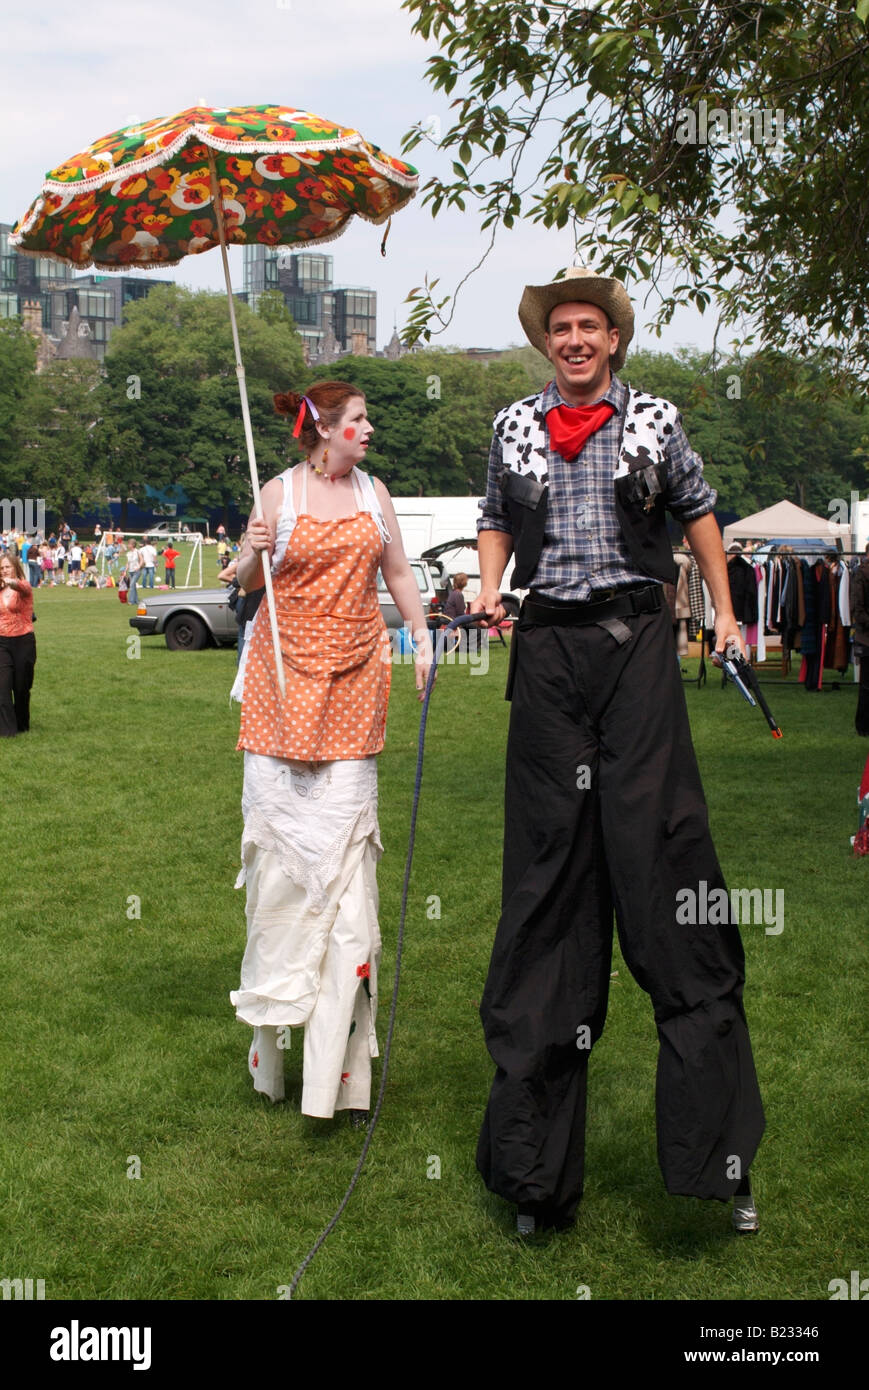 Cowboy and girl entertainers at the 2008 Meadows Festival, Edinburgh Stock Photo